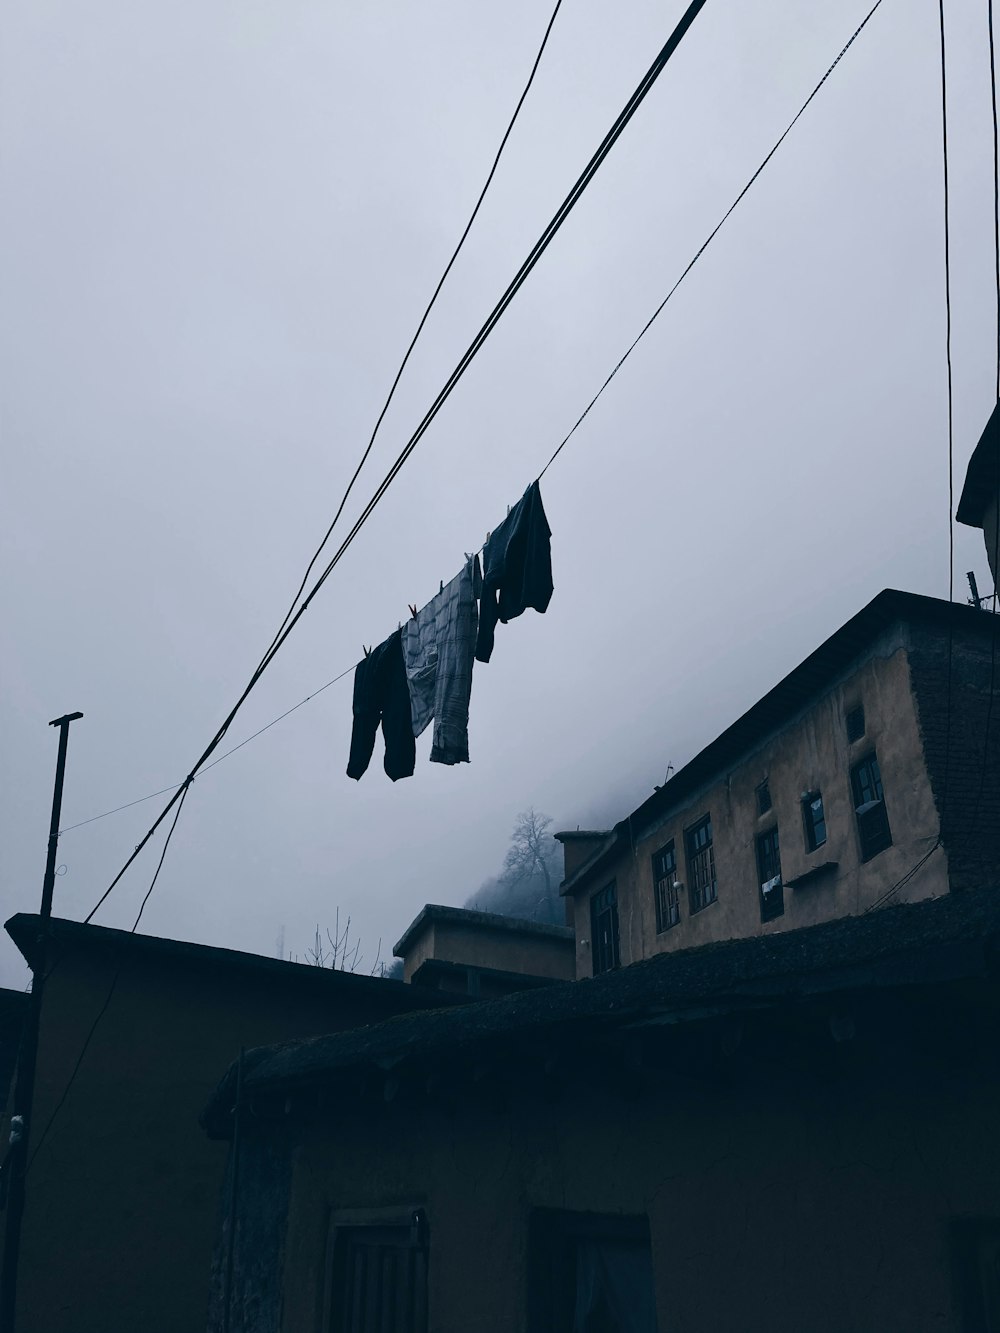 clothes hanging on a clothes line in front of a building